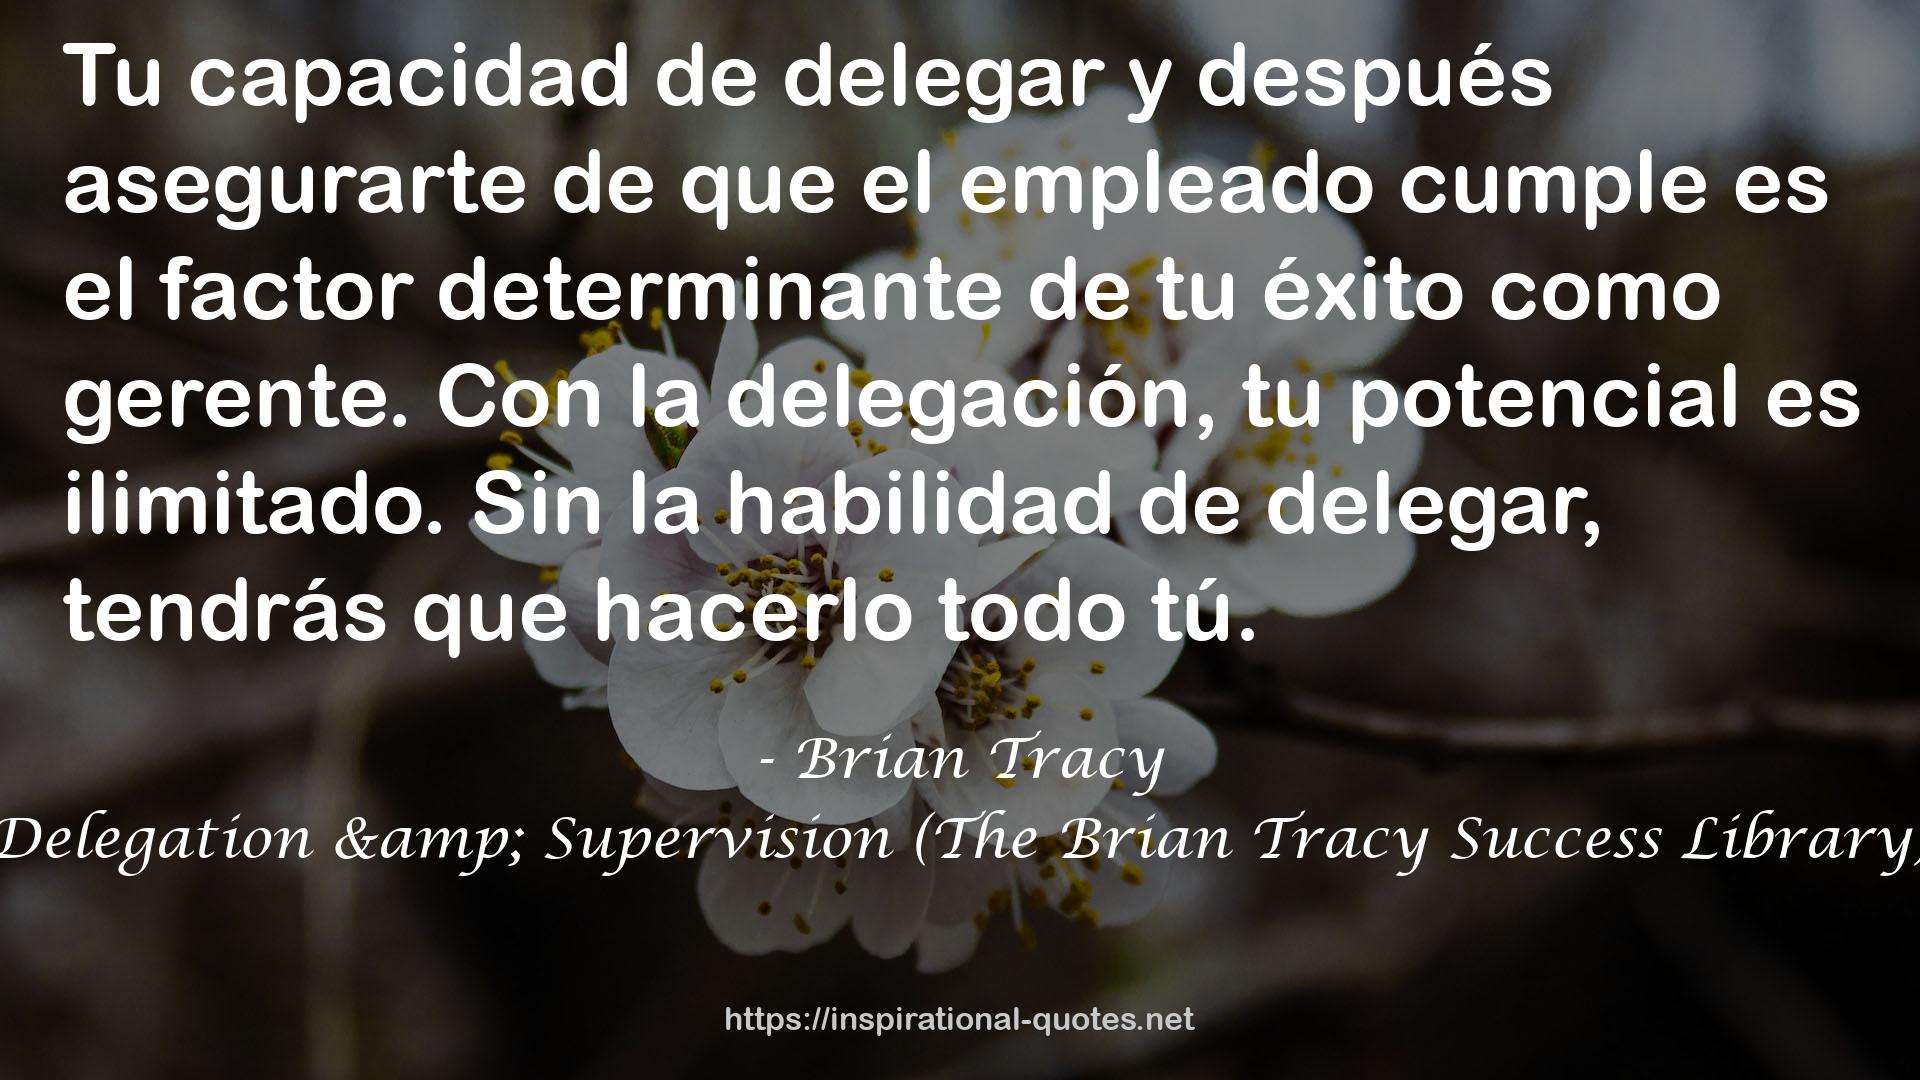 Delegation & Supervision (The Brian Tracy Success Library) QUOTES